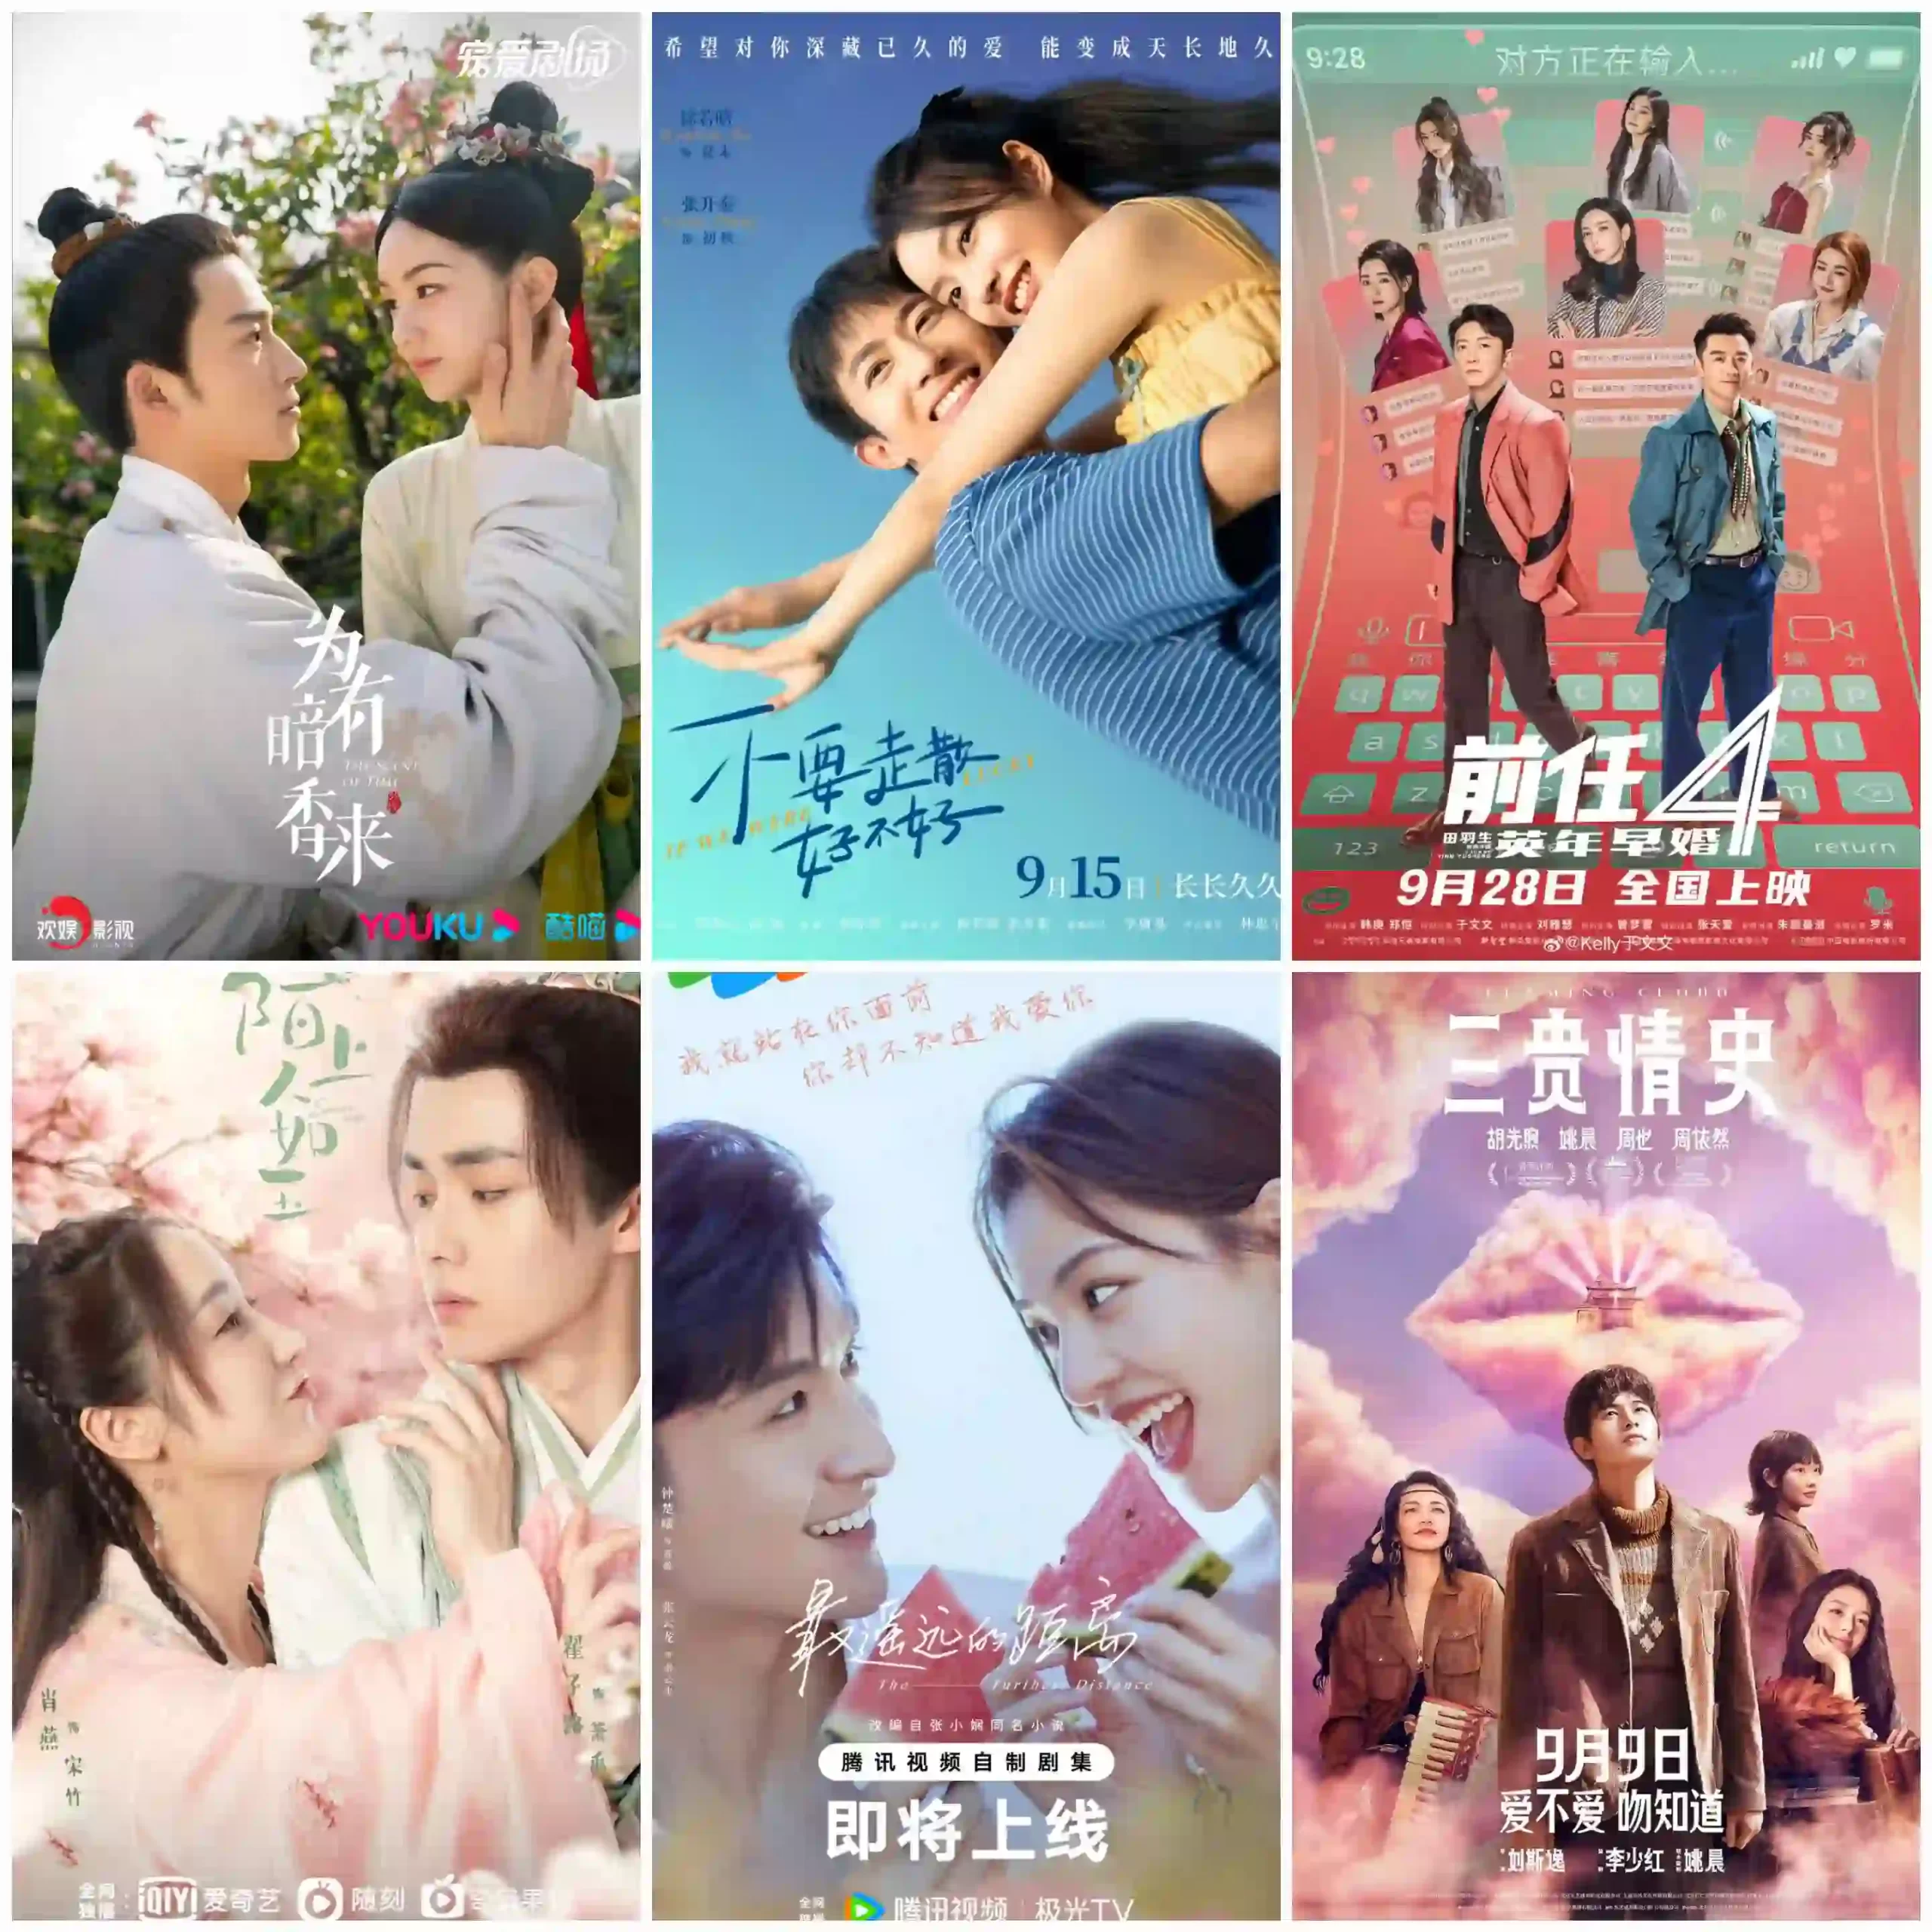 New Chinese dramas and movies coming out in September